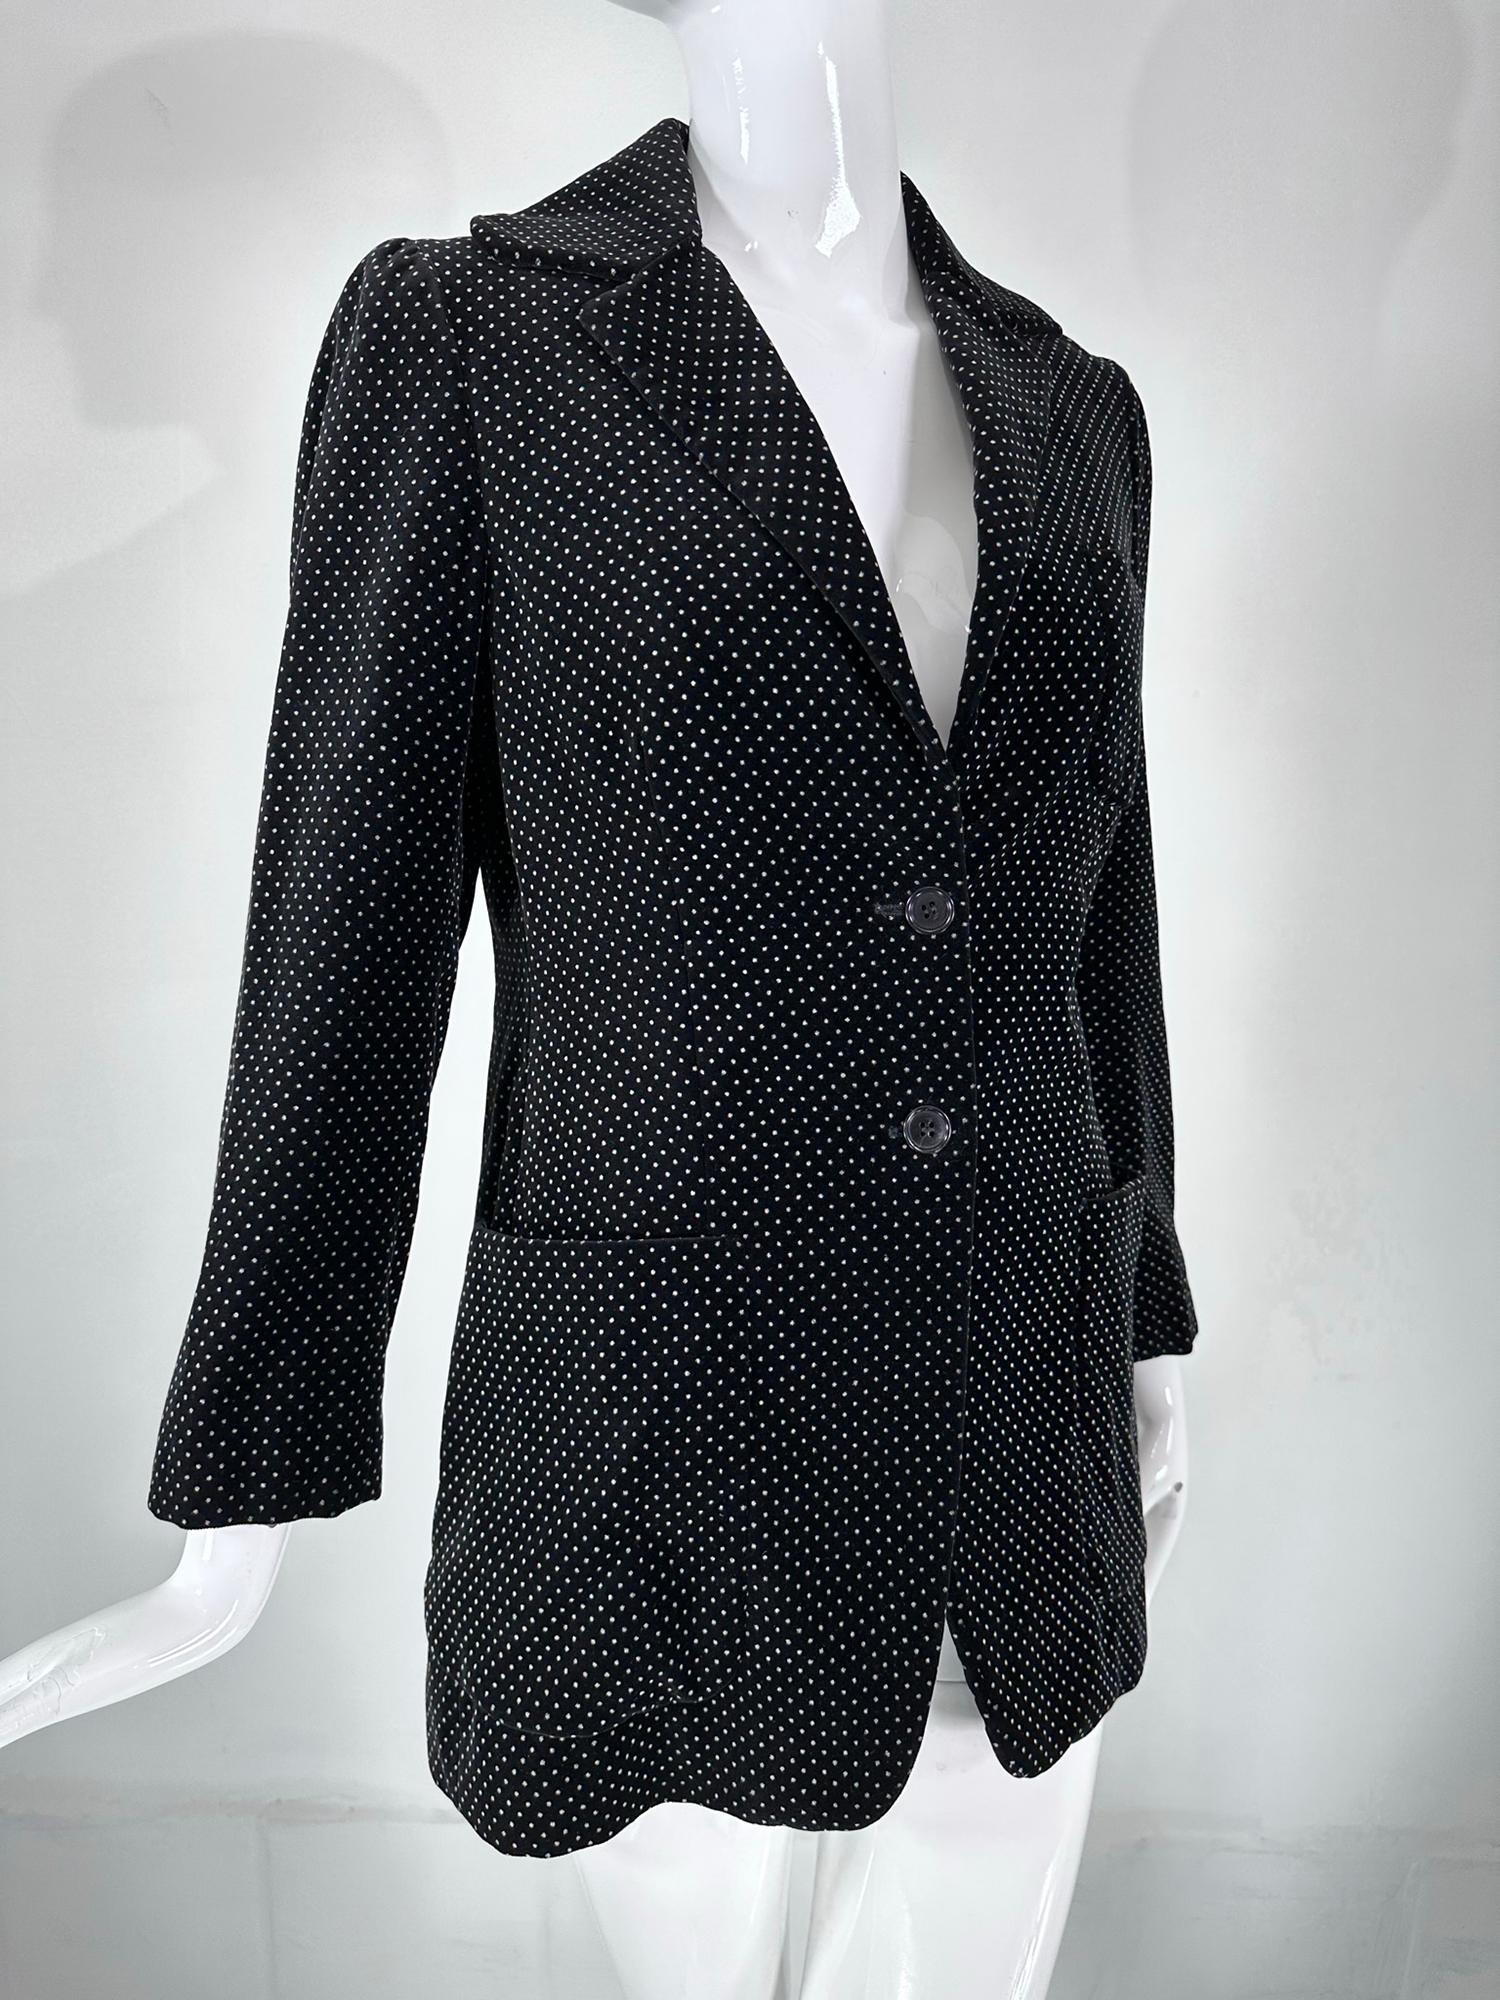 Romeo Gigli white dot, black velvet notched lapel, patch pocket jacket, inverno/winter 1997/98. Cotton velvet jacket in black with small white dots. The jacket has notched lapels and closes at the front with two buttons. Long sleeves with button